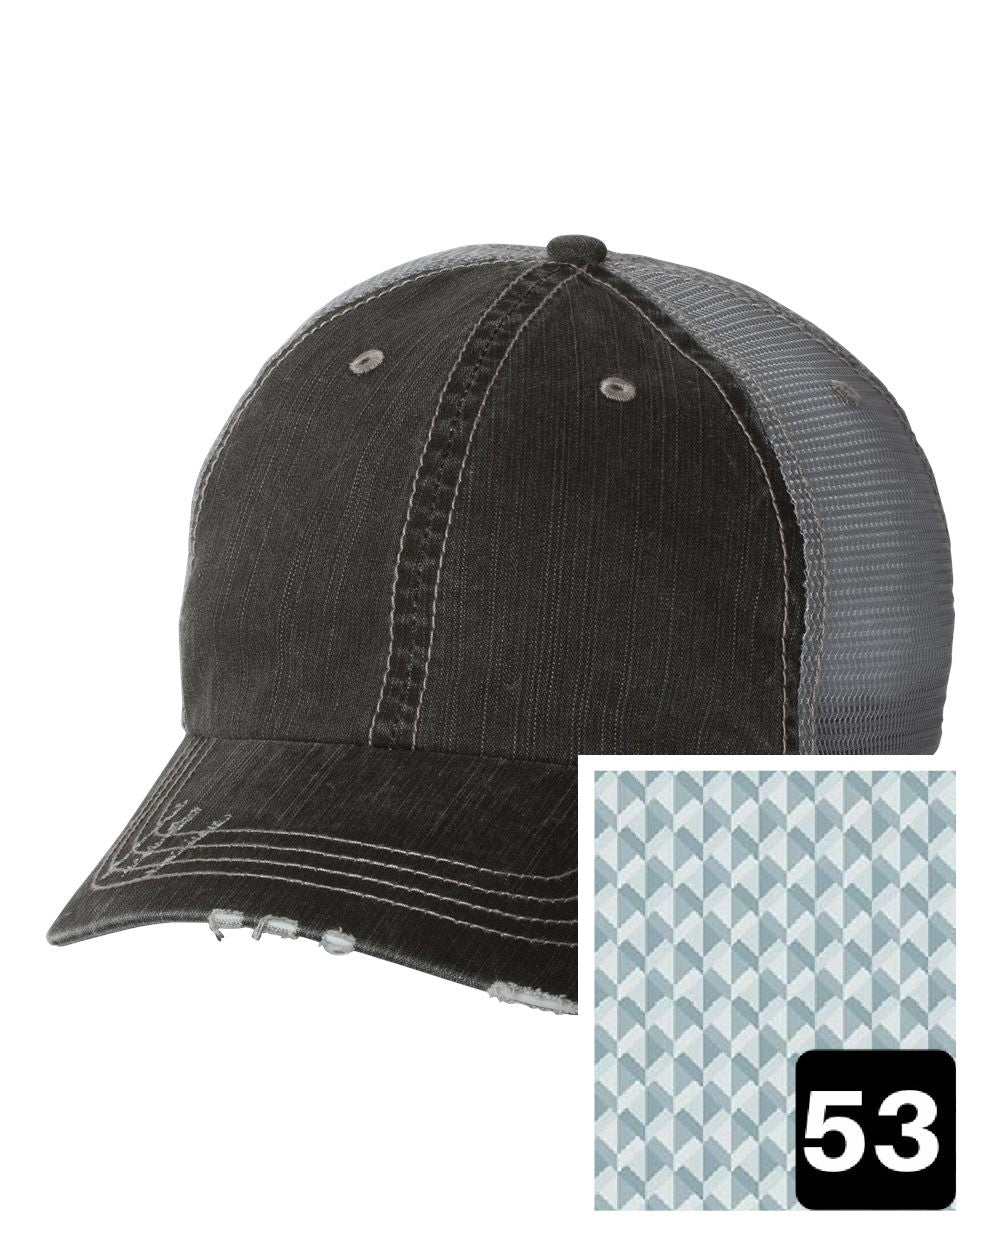 gray distressed trucker hat with multi-color stripe fabric state of Oregon